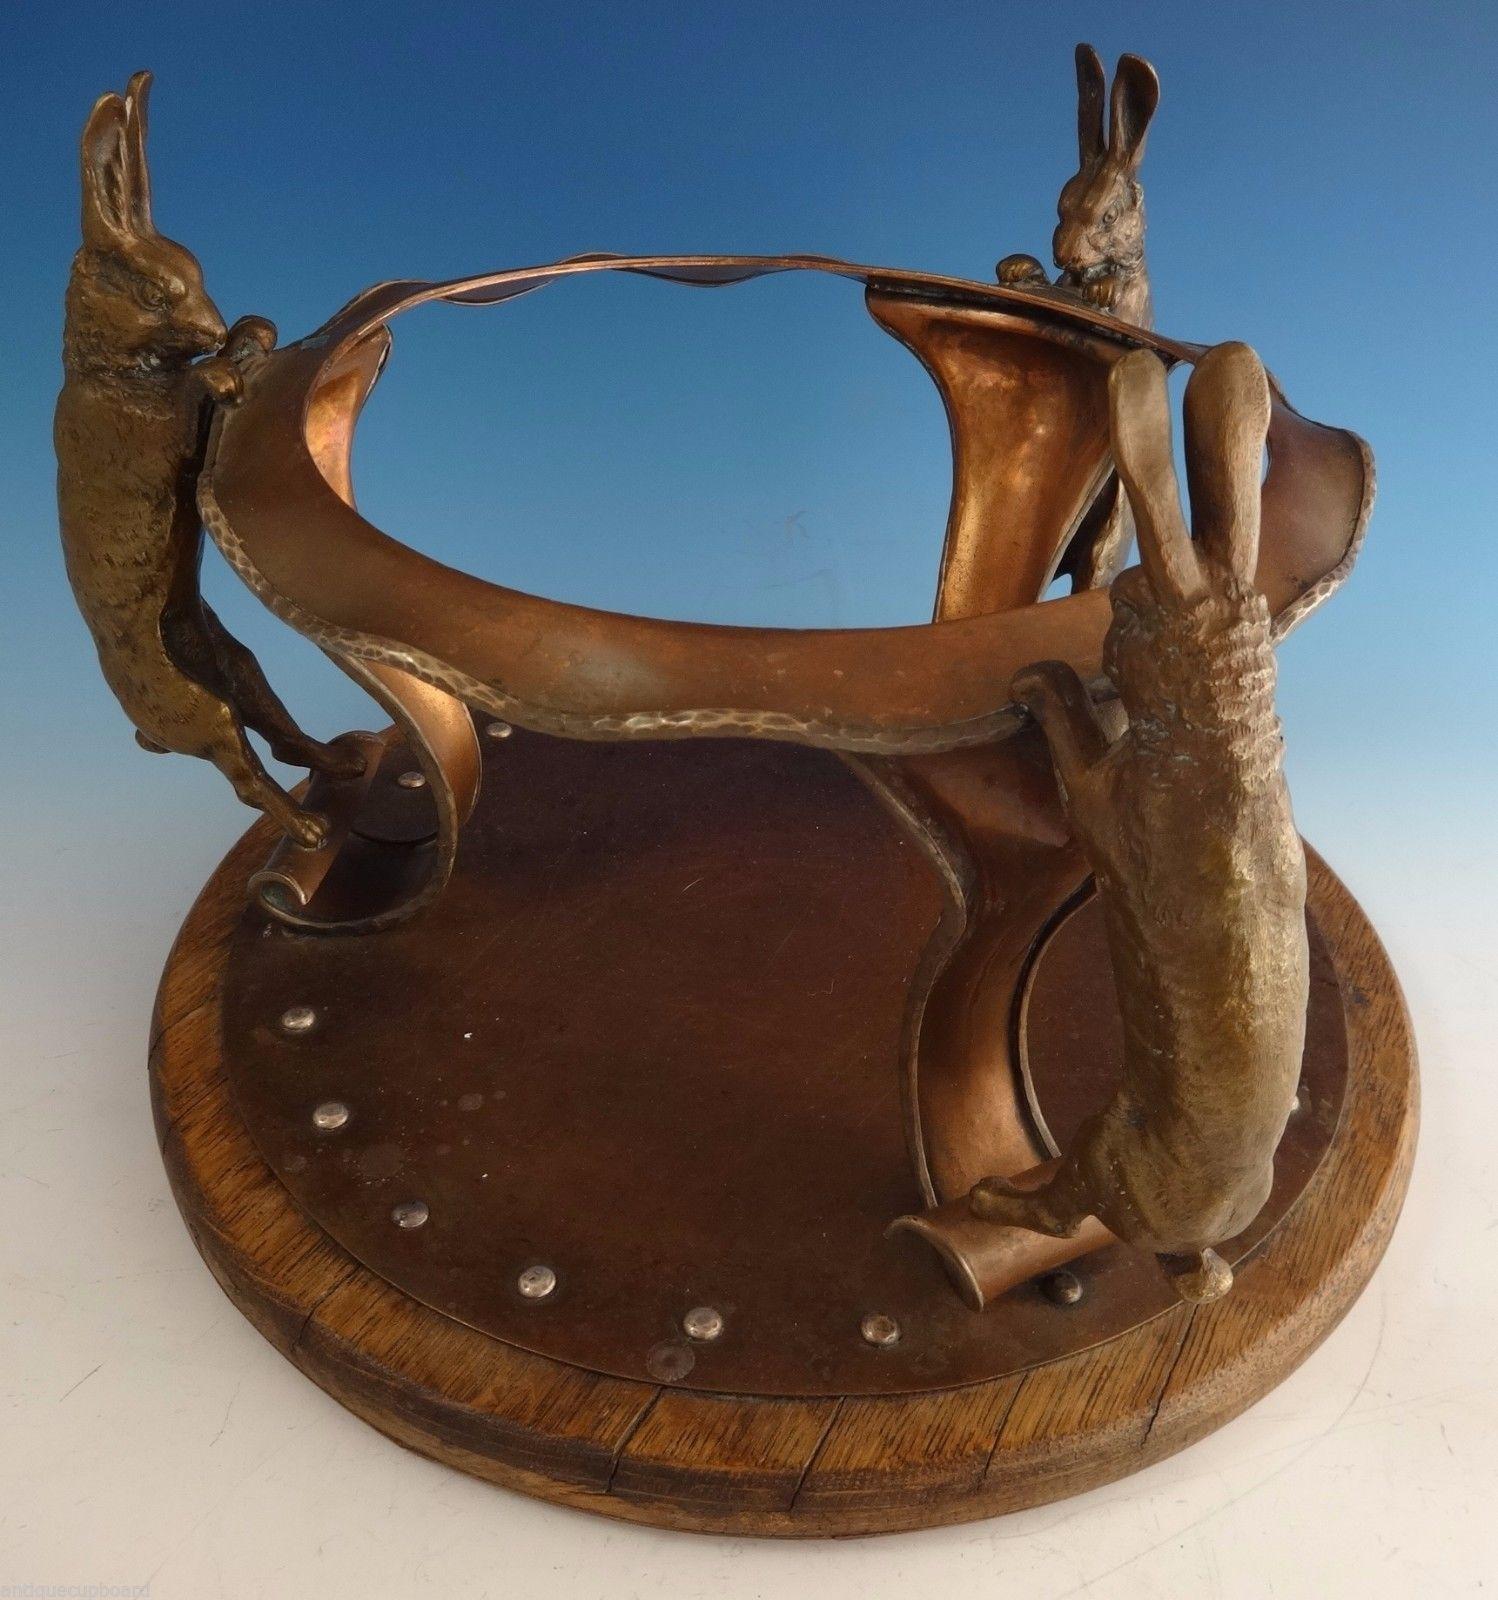 Joseph Heinrich

Arts & Crafts chafing dish made by Joseph Heinrichs featuring fabulous 3-D rabbits. The chaffing dish is made of copper with applied silver scrollwork on the wood handle and finial. It also includes the stand and burner. The piece